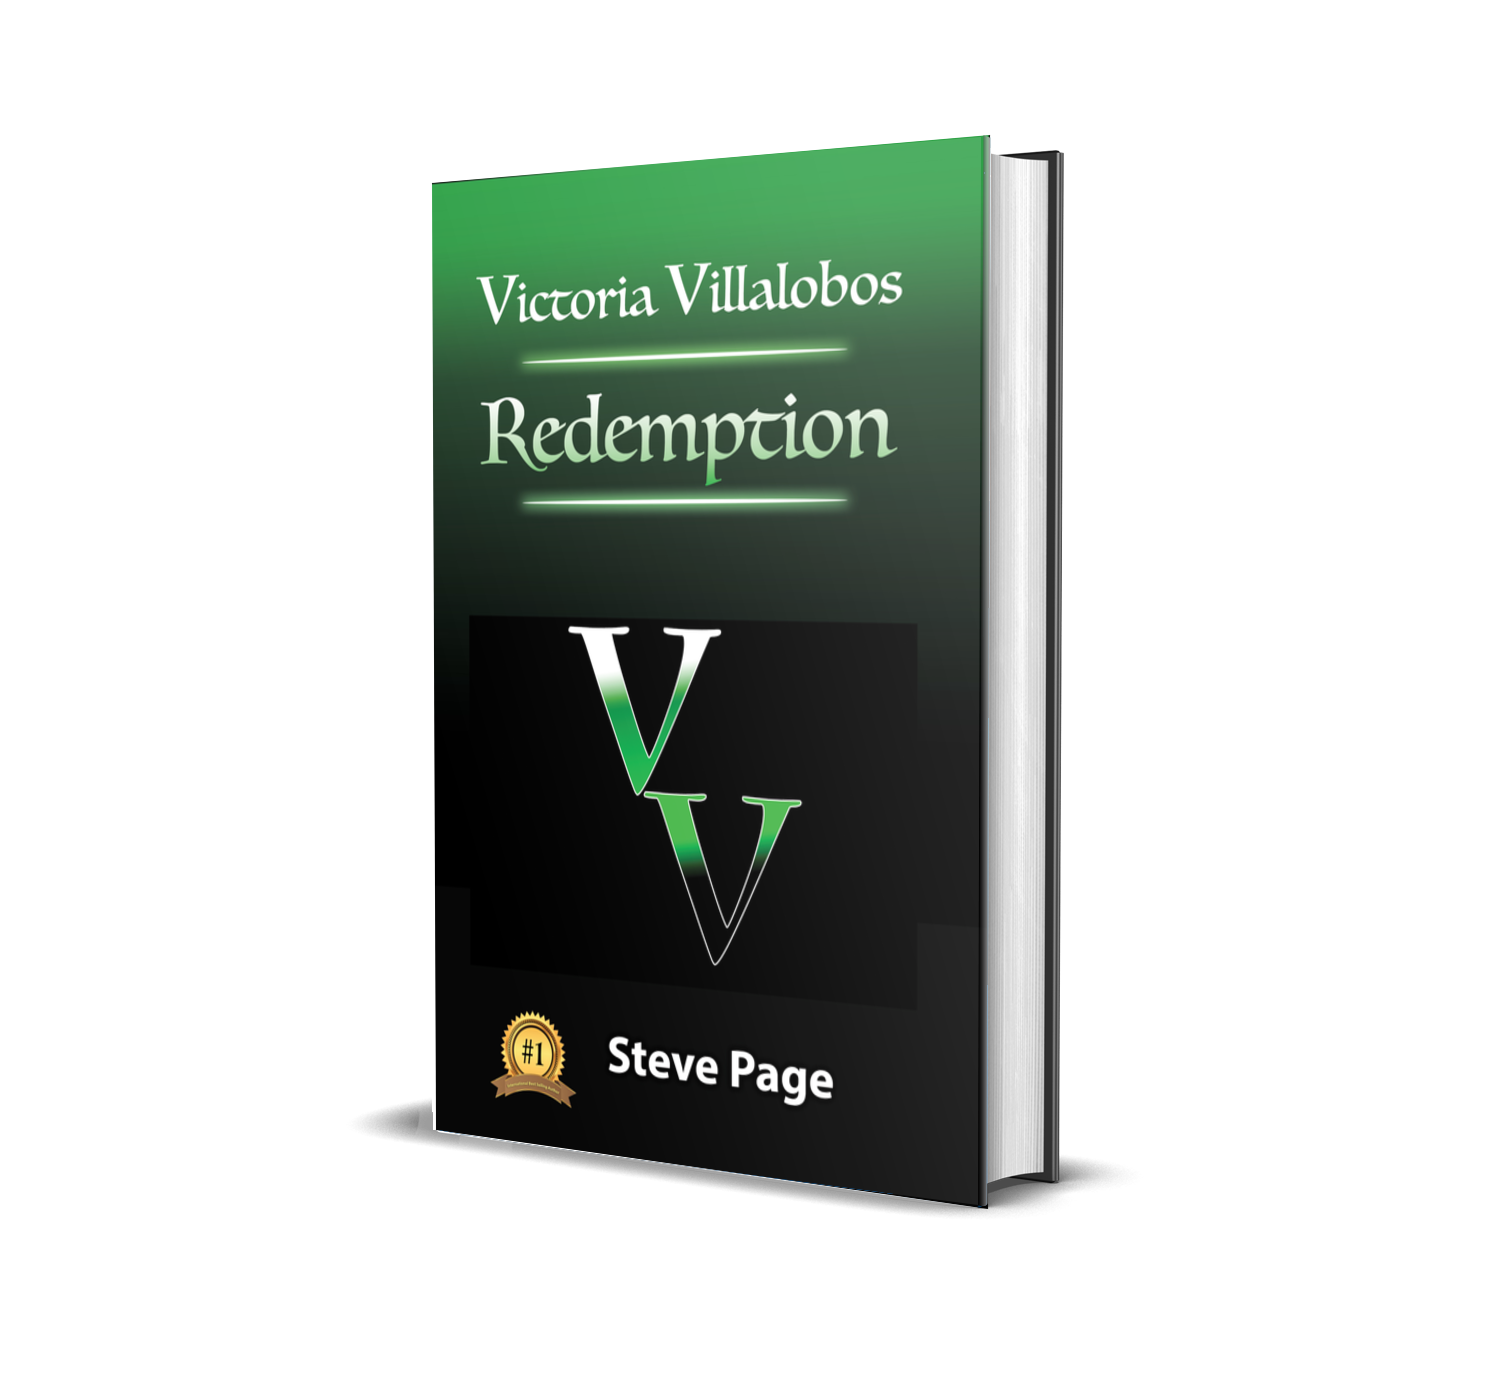 Victoria Villalobos - Redemption - by author Steve Page - Hardcover